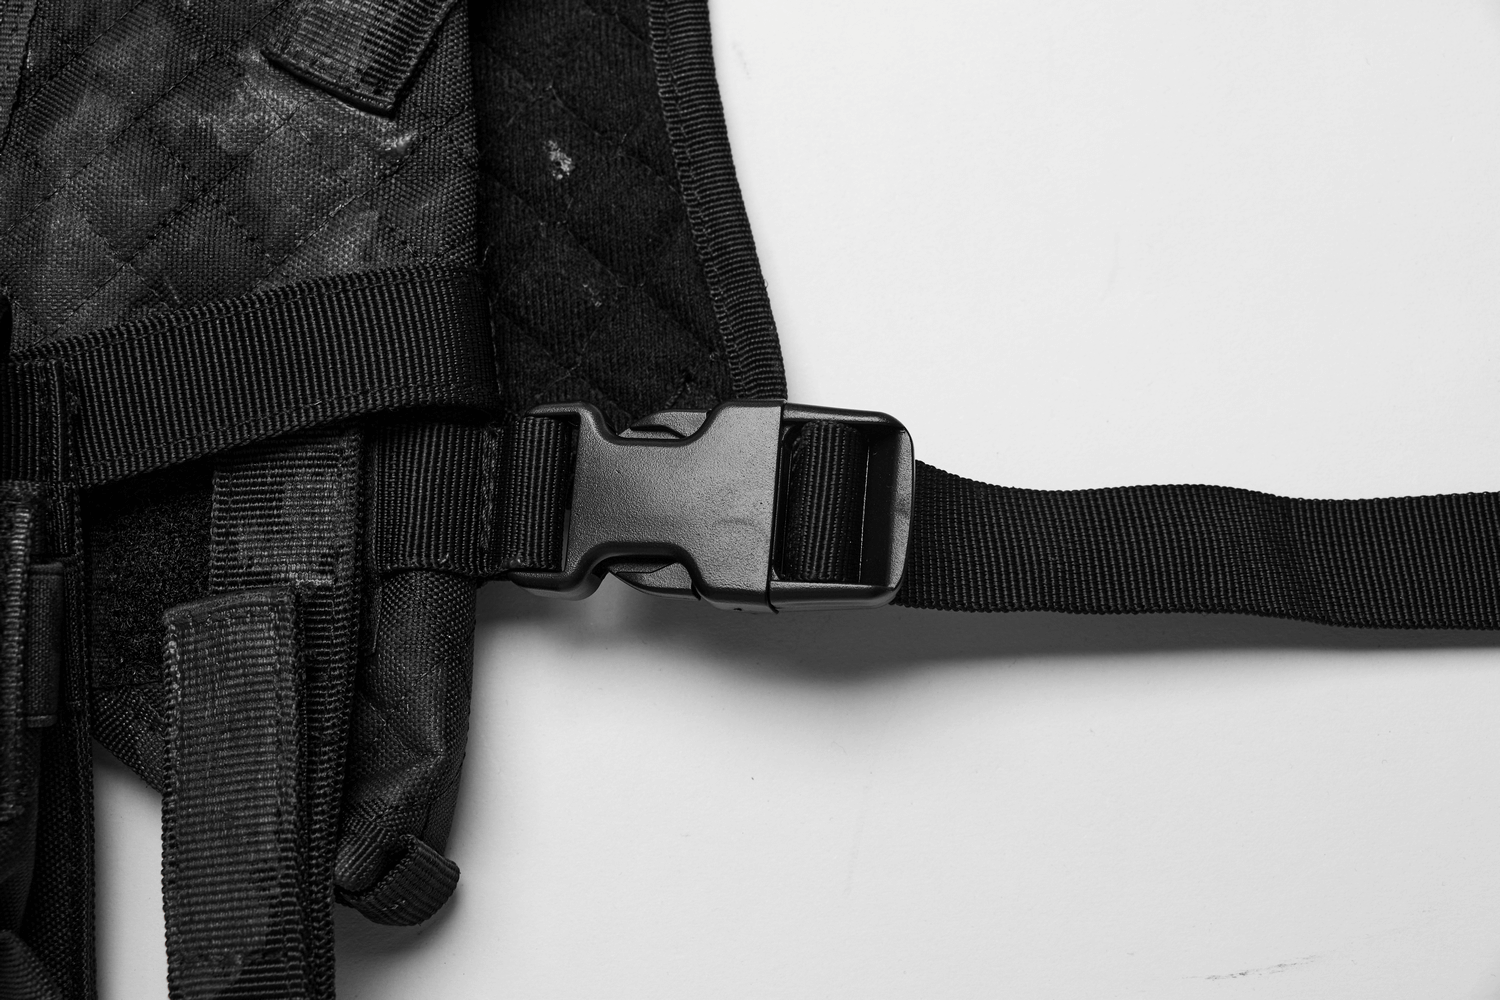 Cyberpunk Adjustable Harness with Detachable Bags